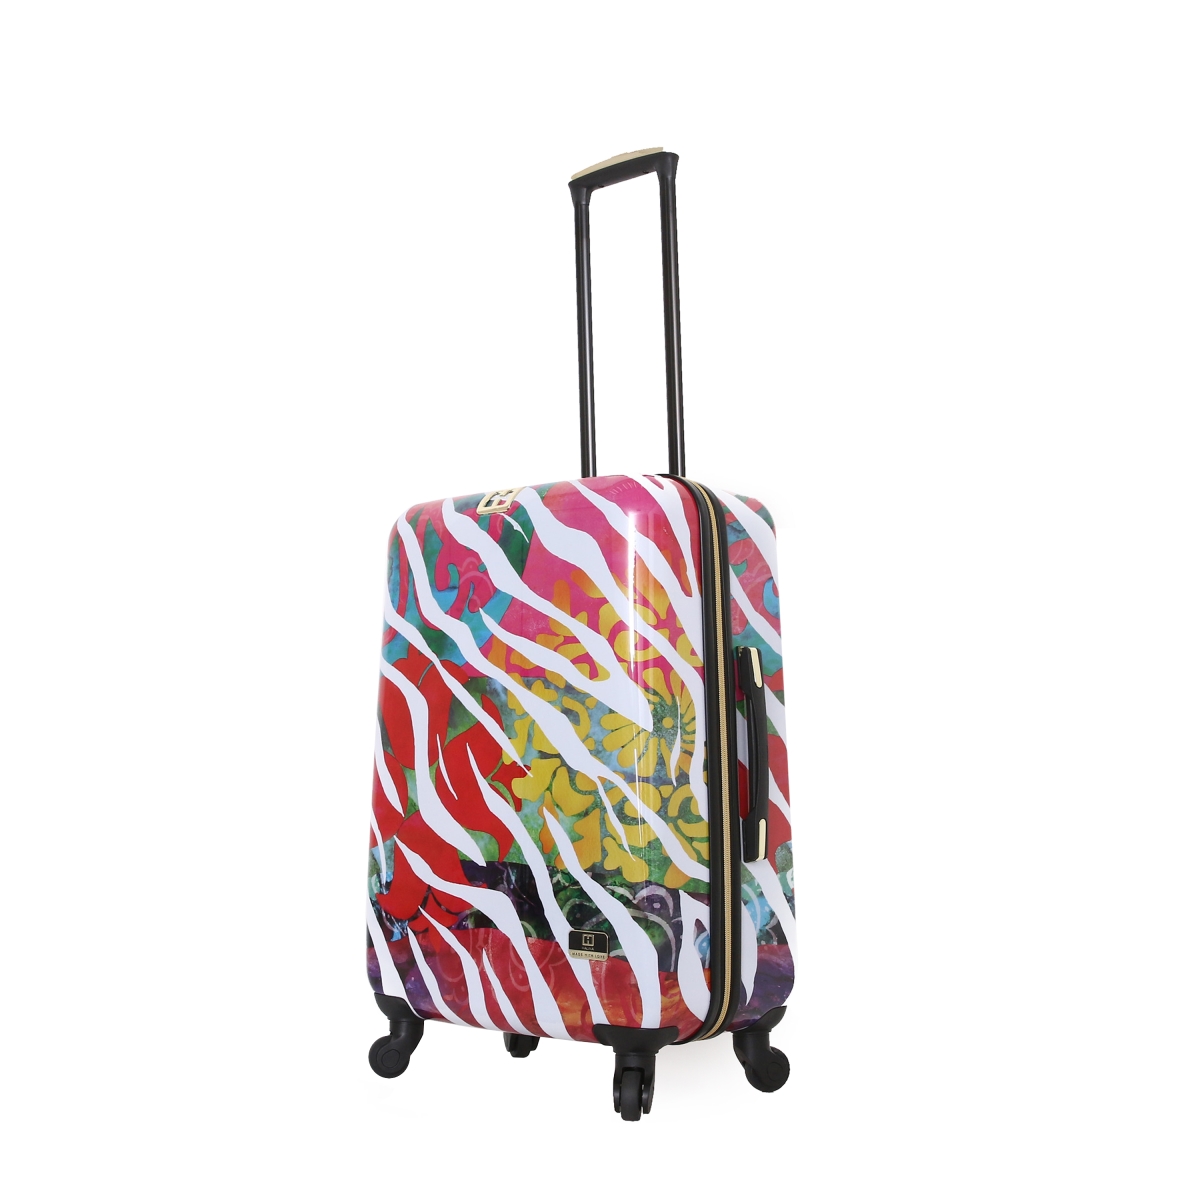 H1000-24-bsrnn 24 In. Bee Sturgis Serengeti Reflections Carry On Luggage, Multicolor